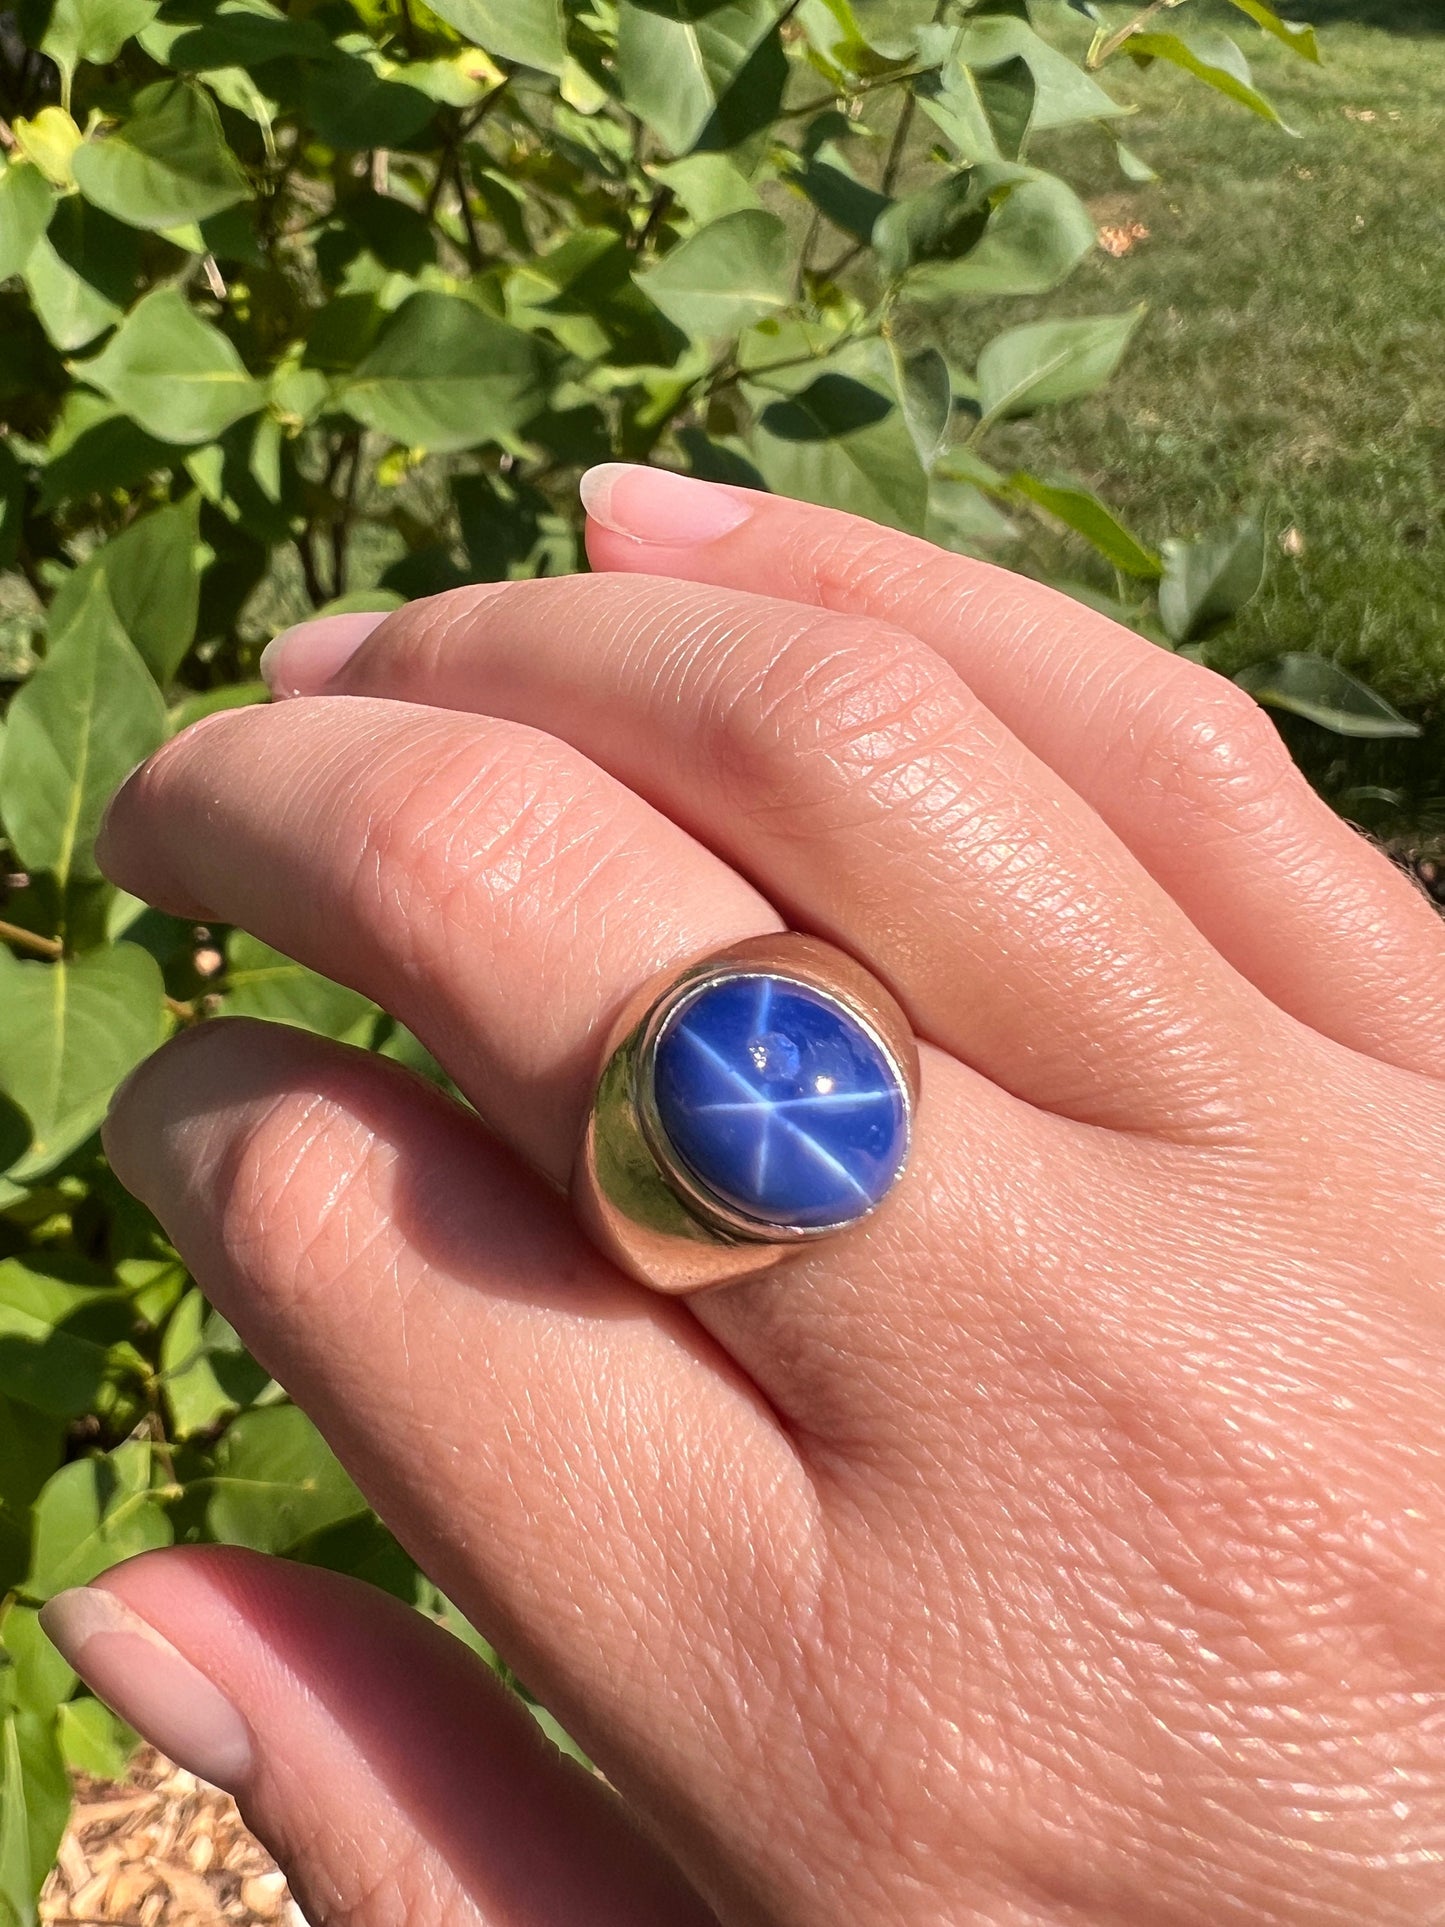 HEAVY Art Deco Star SAPPHIRE French Ring 15.1g 18k White Gold PLATINUM Wide Band Chunky Romantic Gift Glowing Blue Orb Antique Belle Epoque